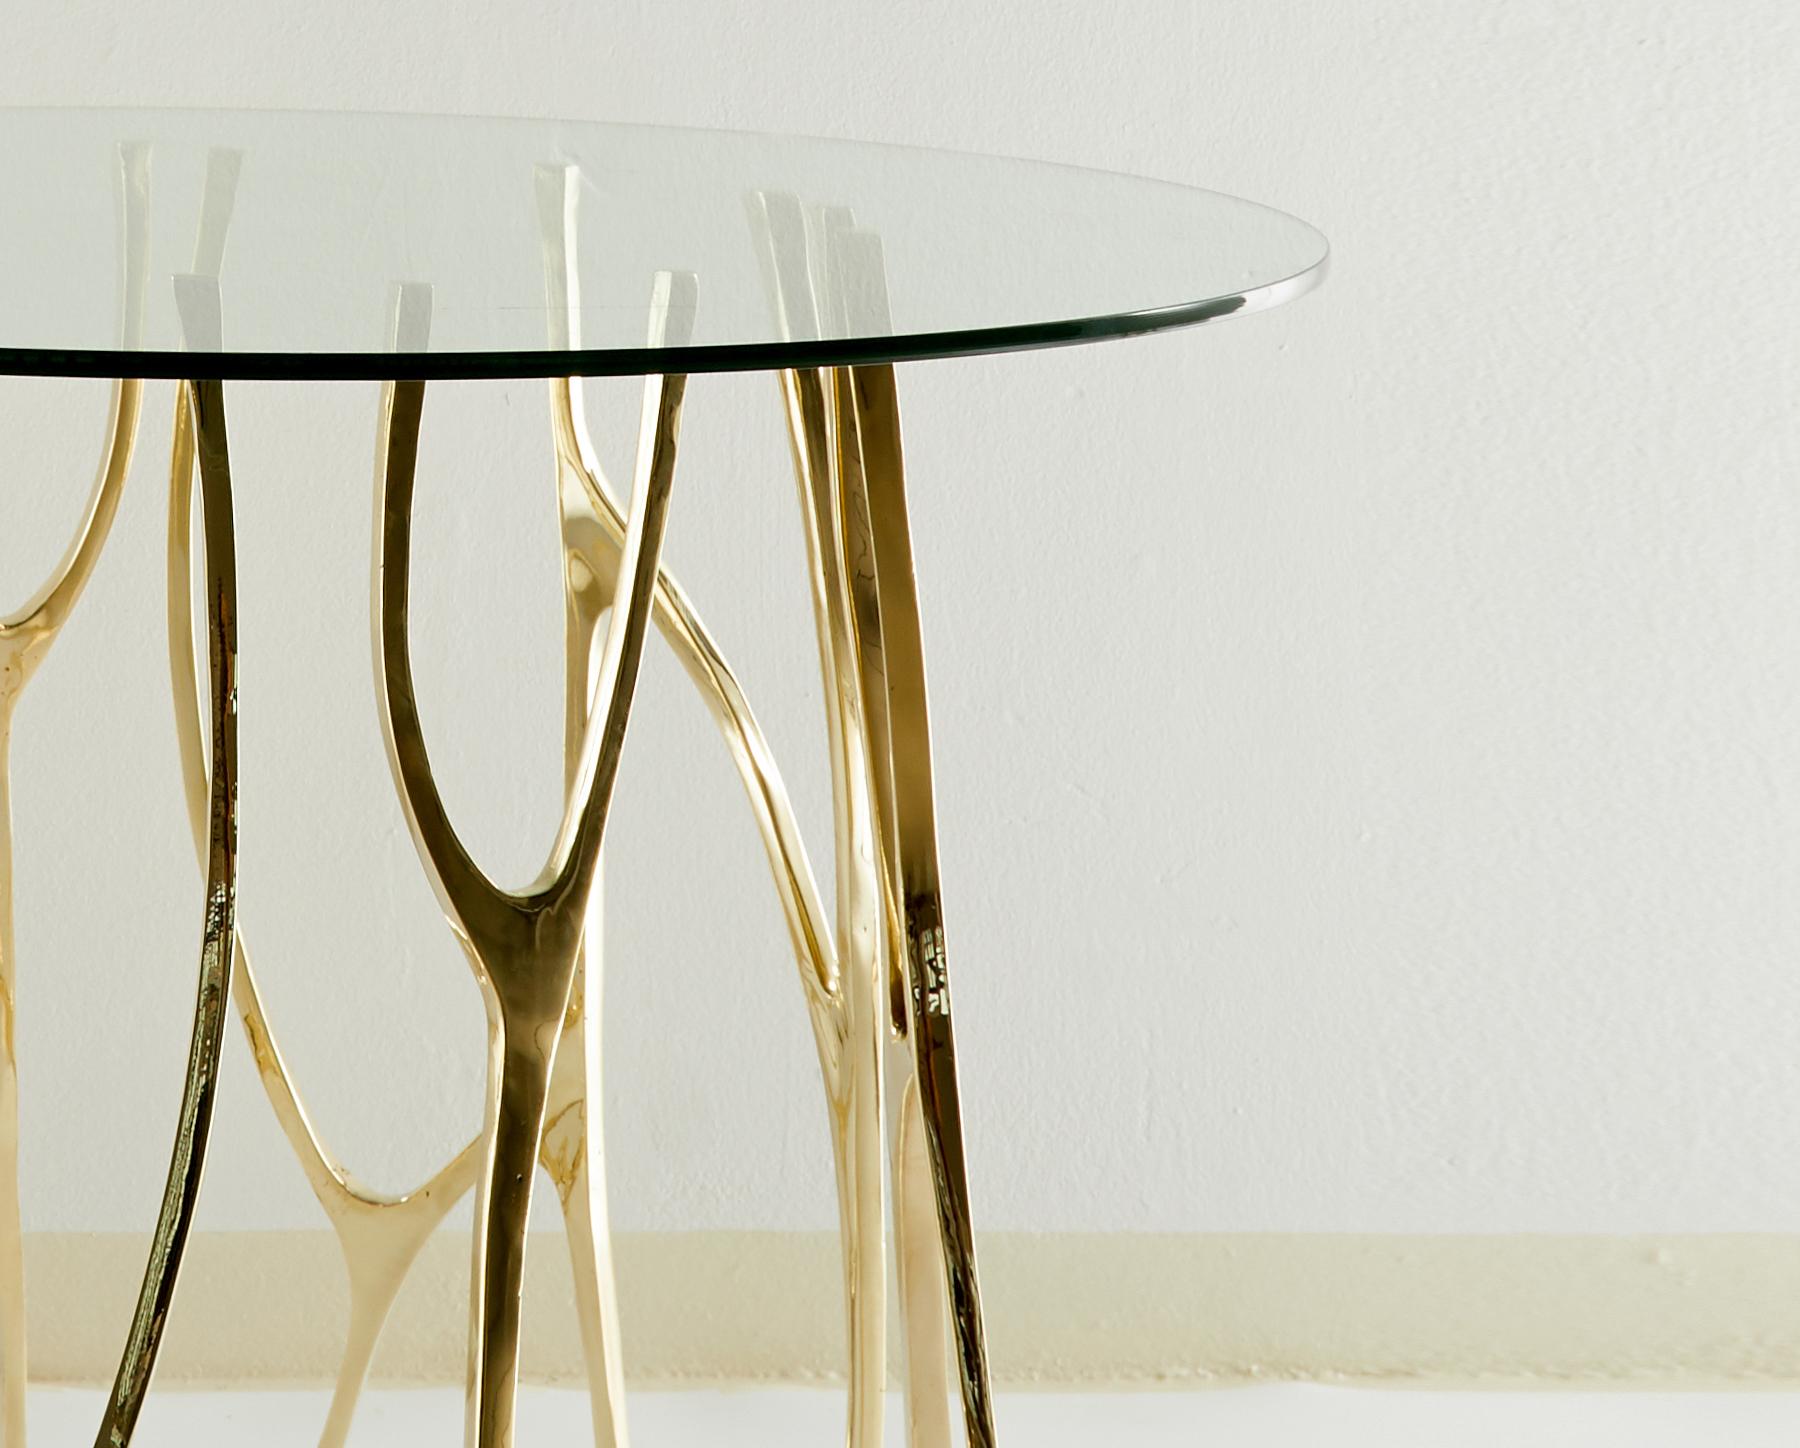 Brass sculpted round table - Golden Roots - Misaya
Dimensions: W 74 x L 74 x H 73 cm
Hand-sculpted brass table.
Sold without the glass top.